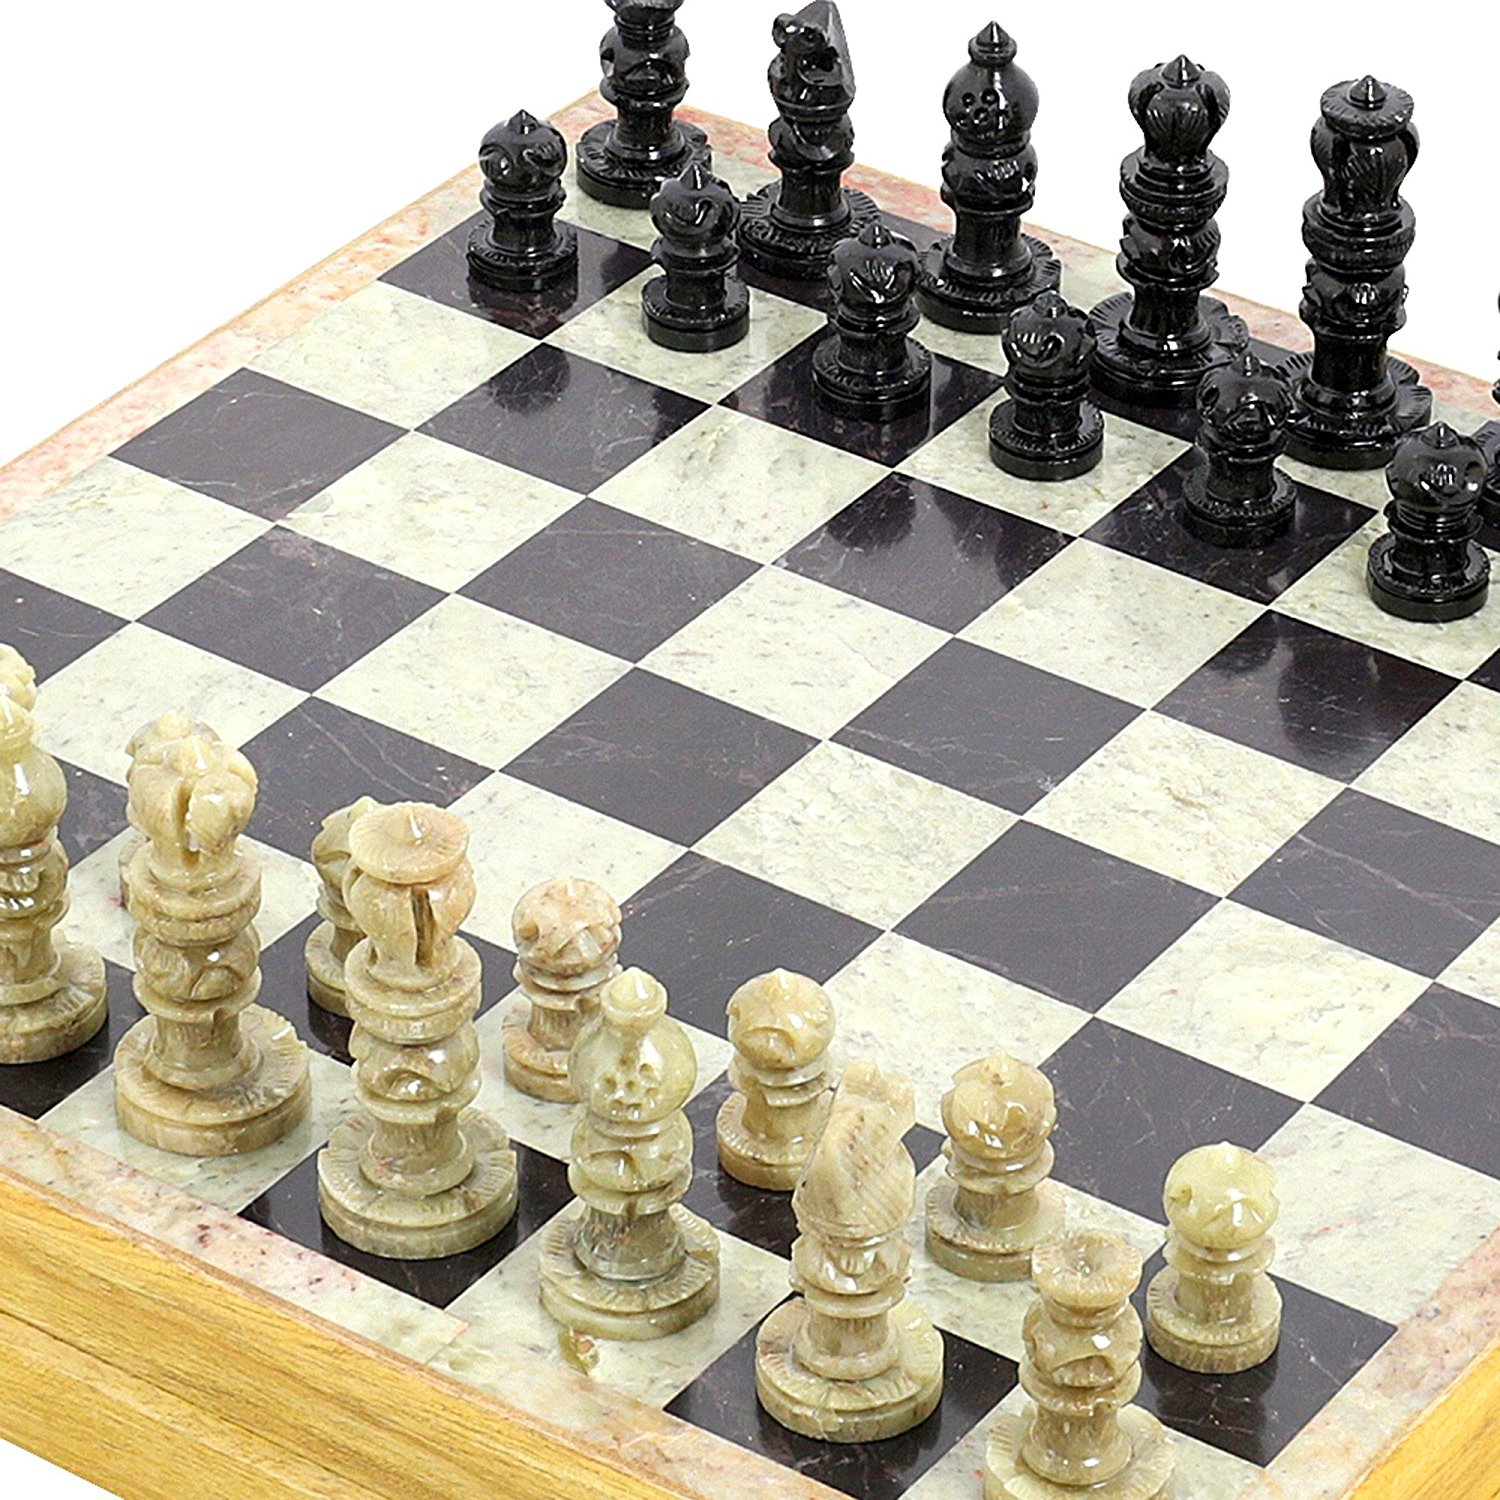 Amazon.com: Rajasthan Stone Art Unique Chess Sets and Board: Toys ...